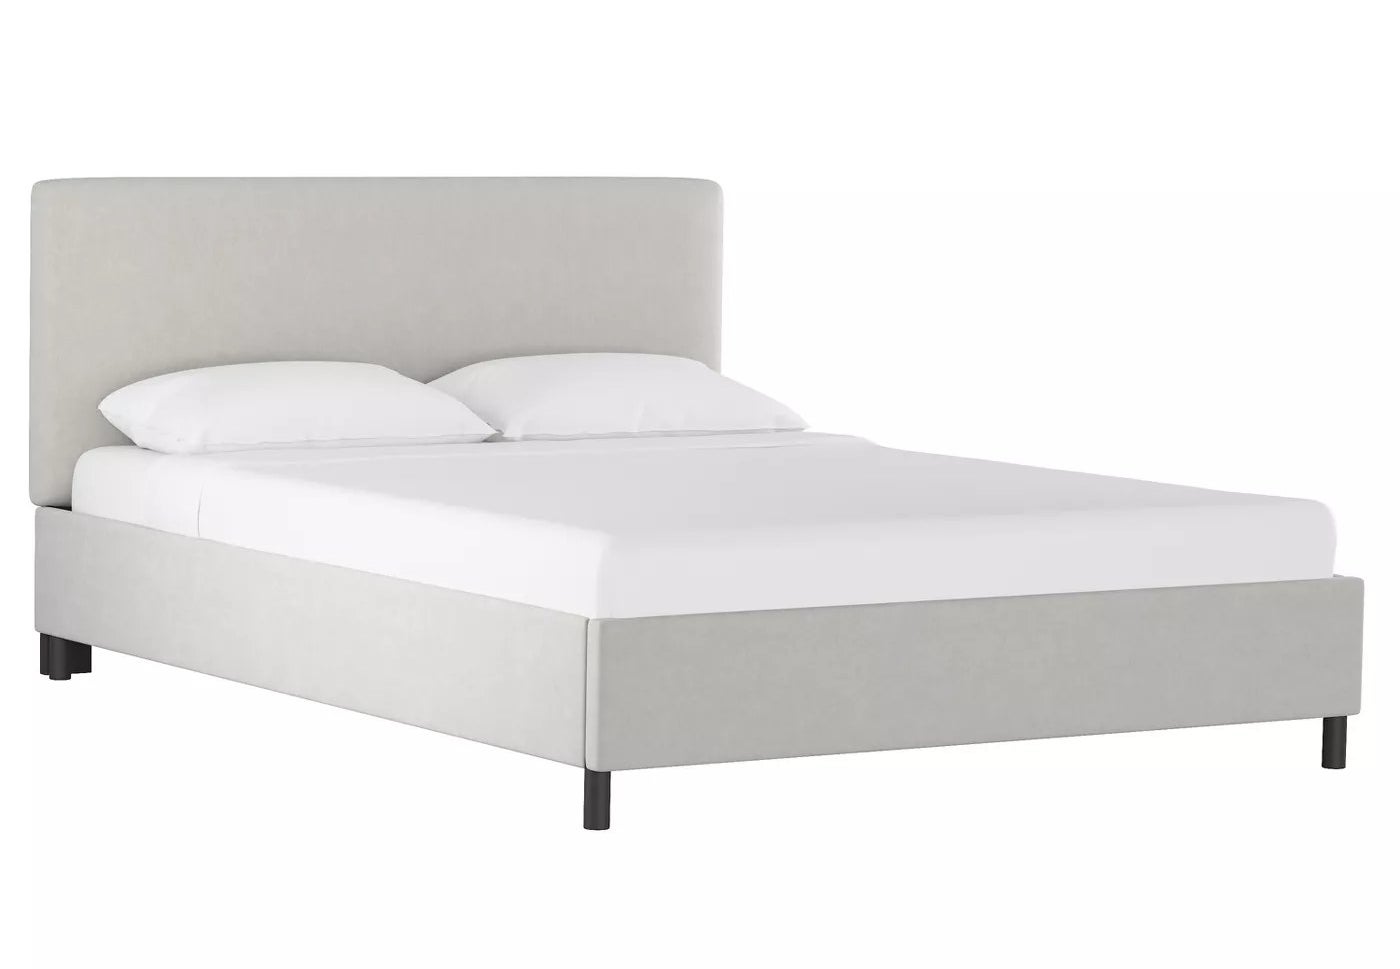 The bed in gray with black legs